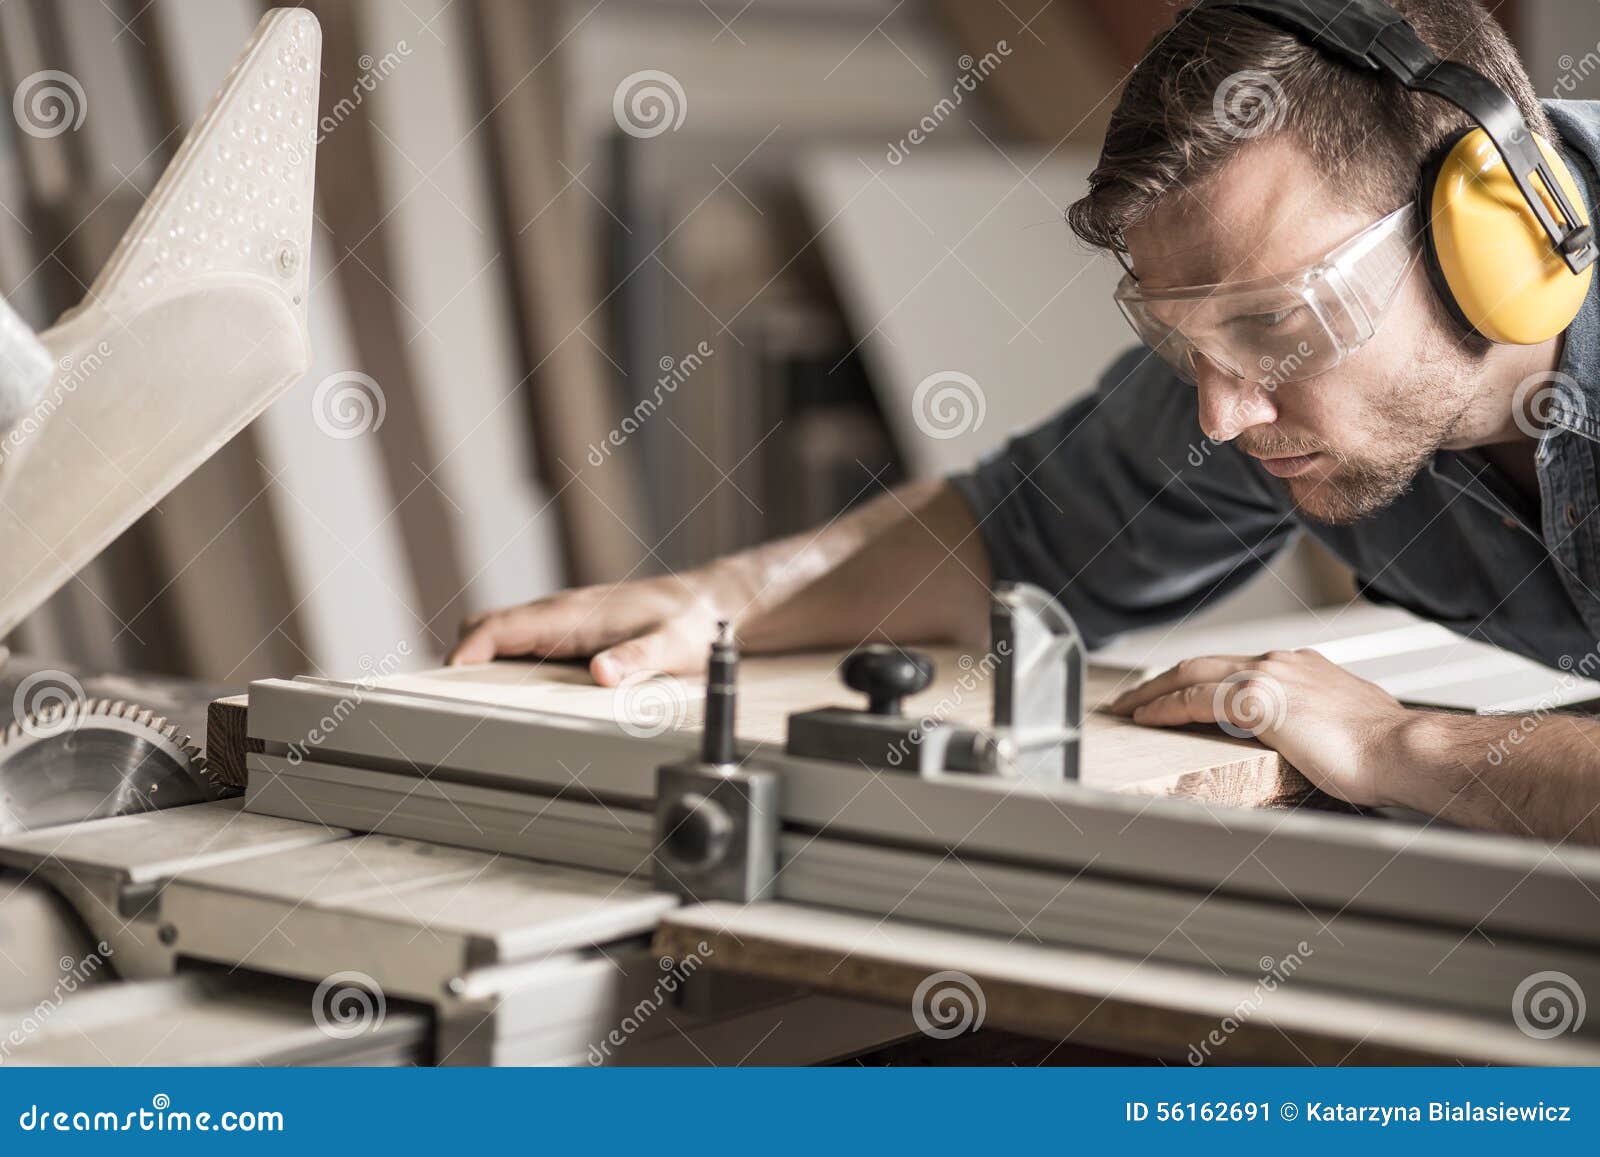 young man doing woodwork